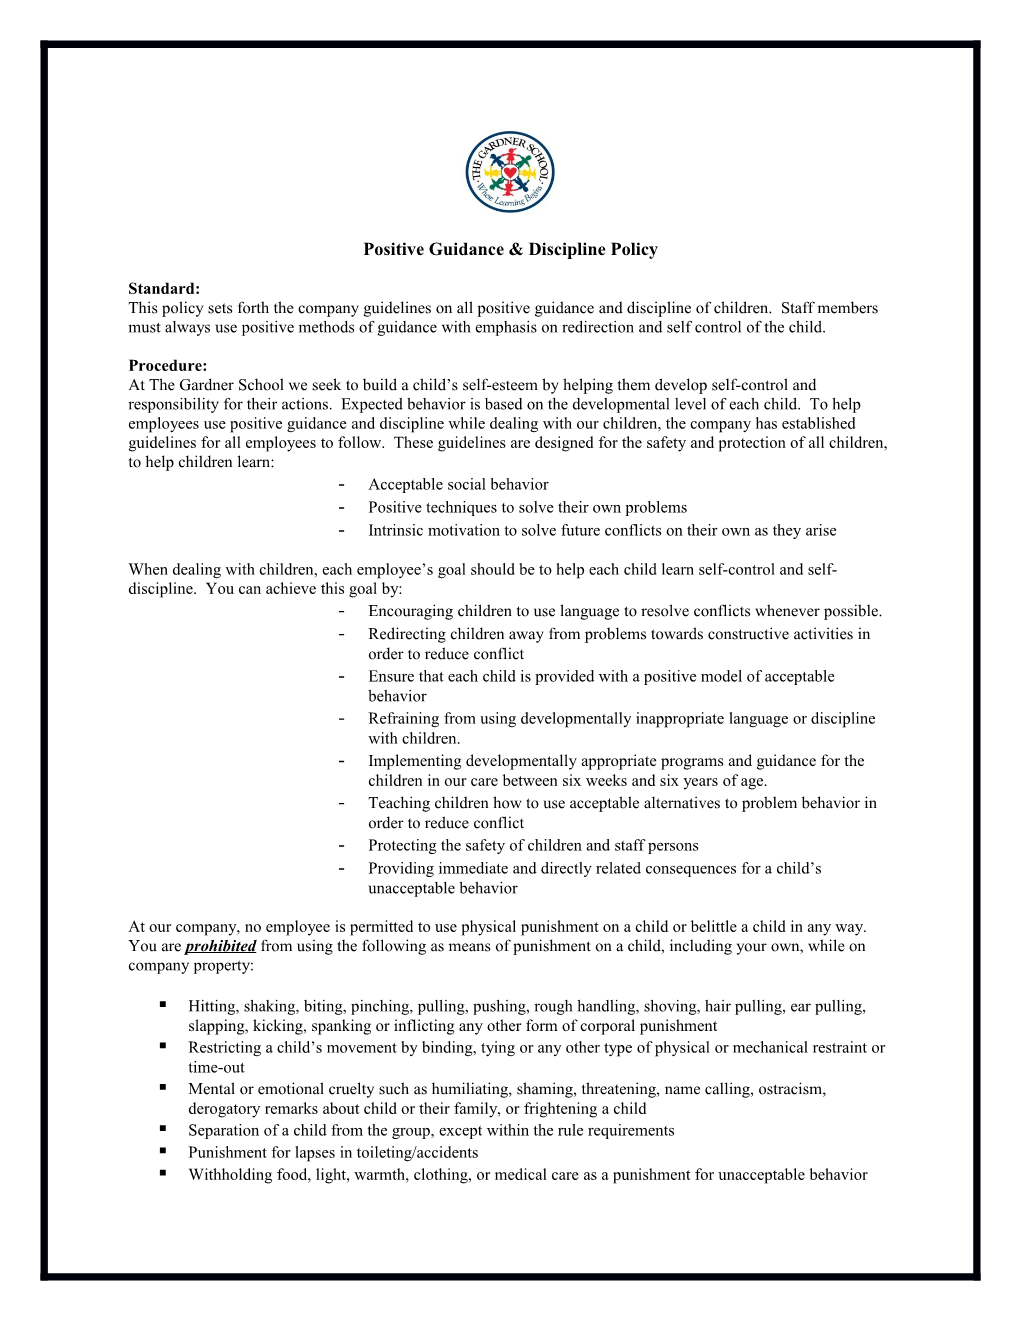 Positive Guidance & Discipline Policy